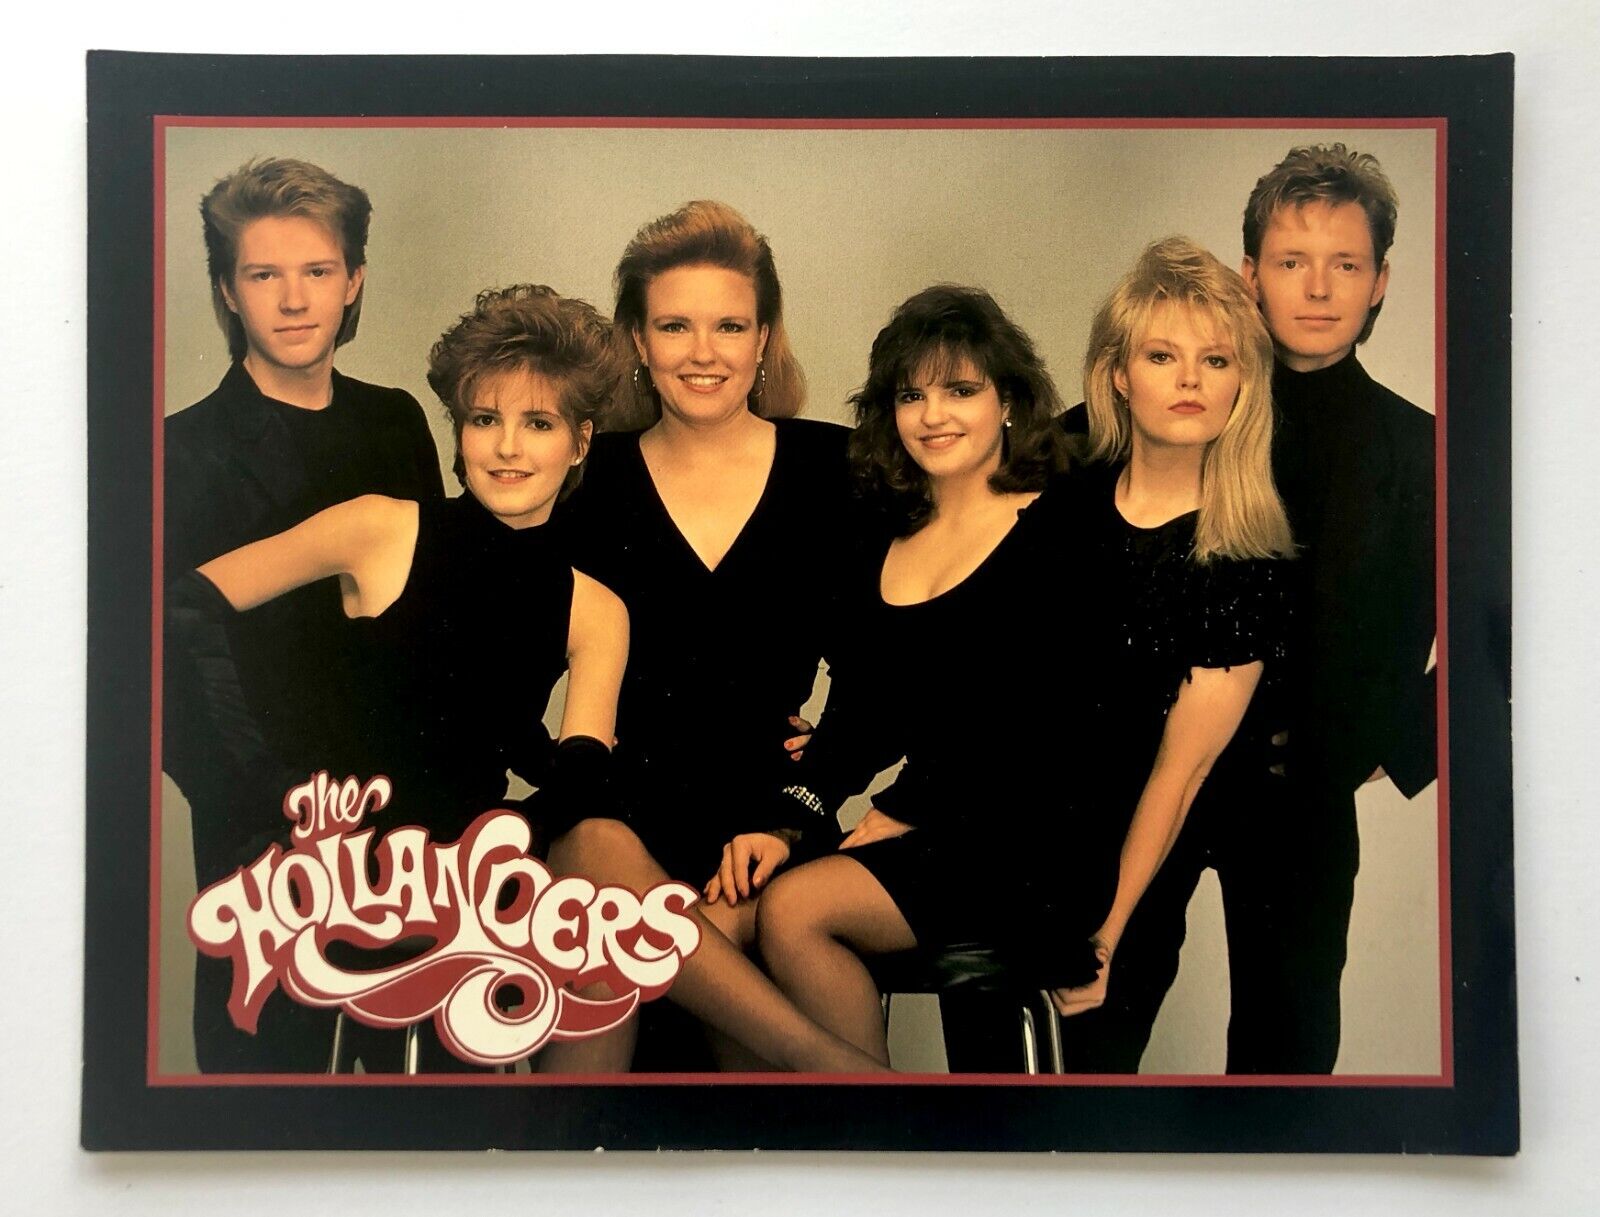 1980s Hollanders Press Promo Photo Family Country Music Band Can\'t Blame Train